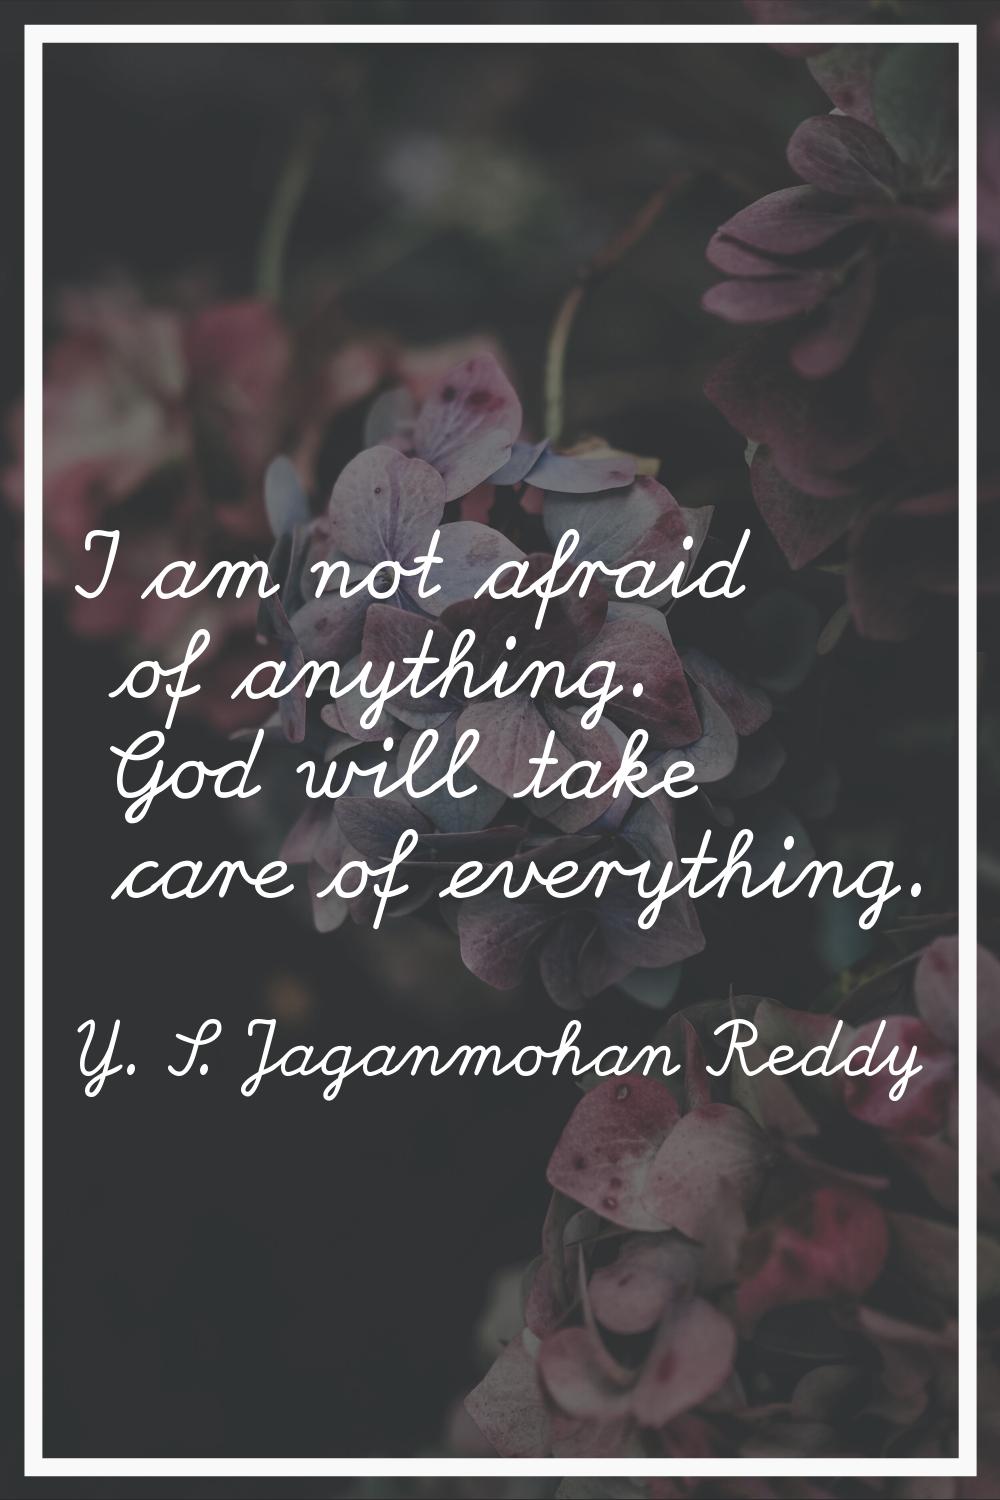 I am not afraid of anything. God will take care of everything.